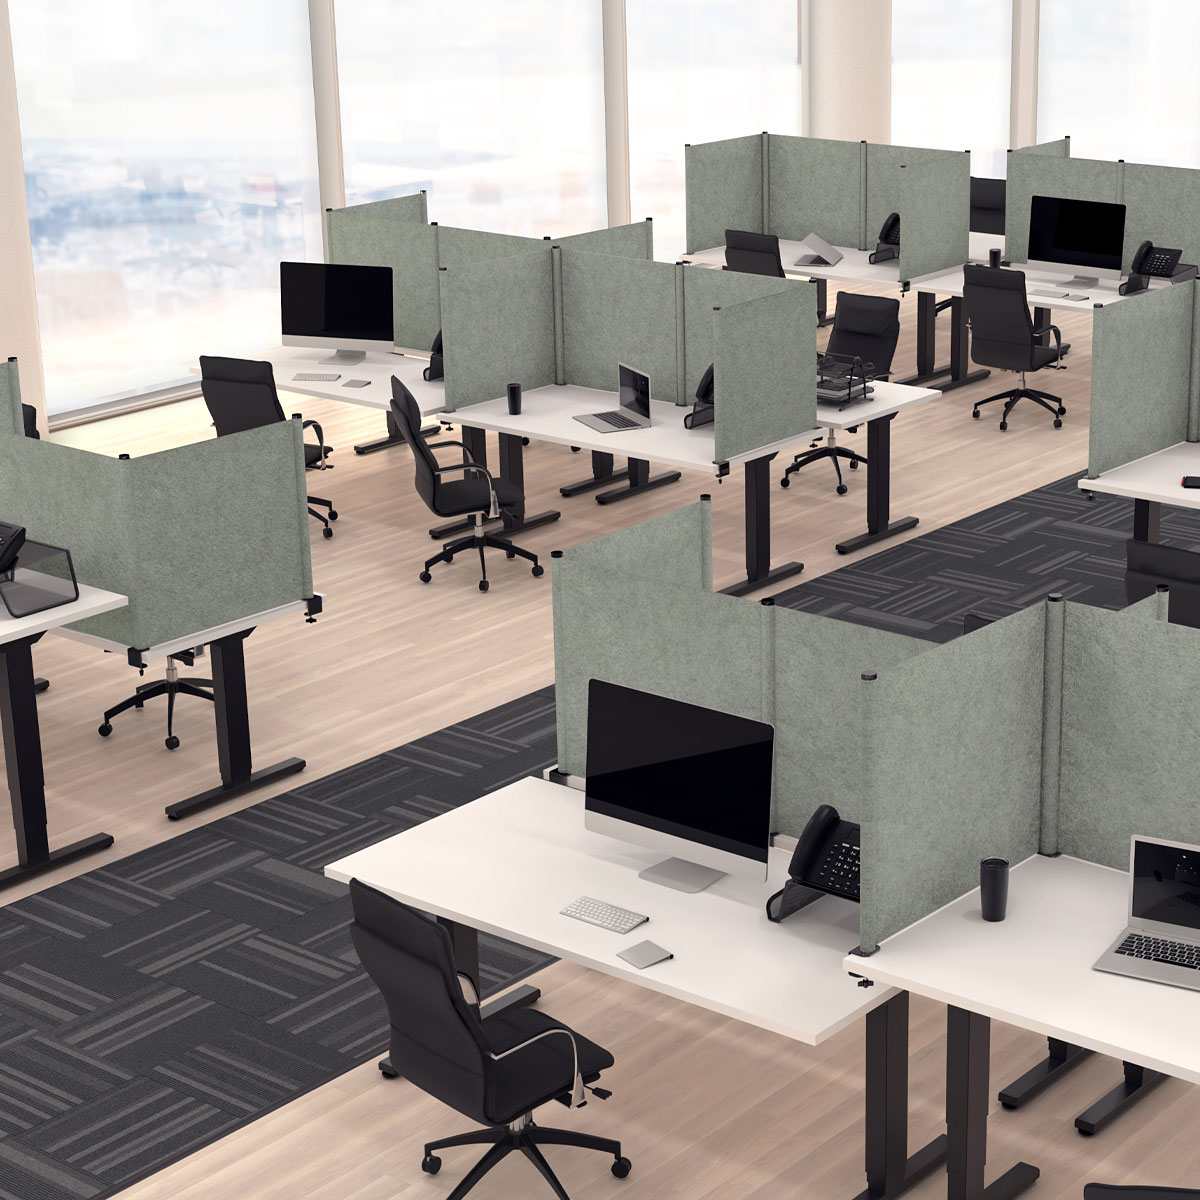 large open office with privacy screens around desks